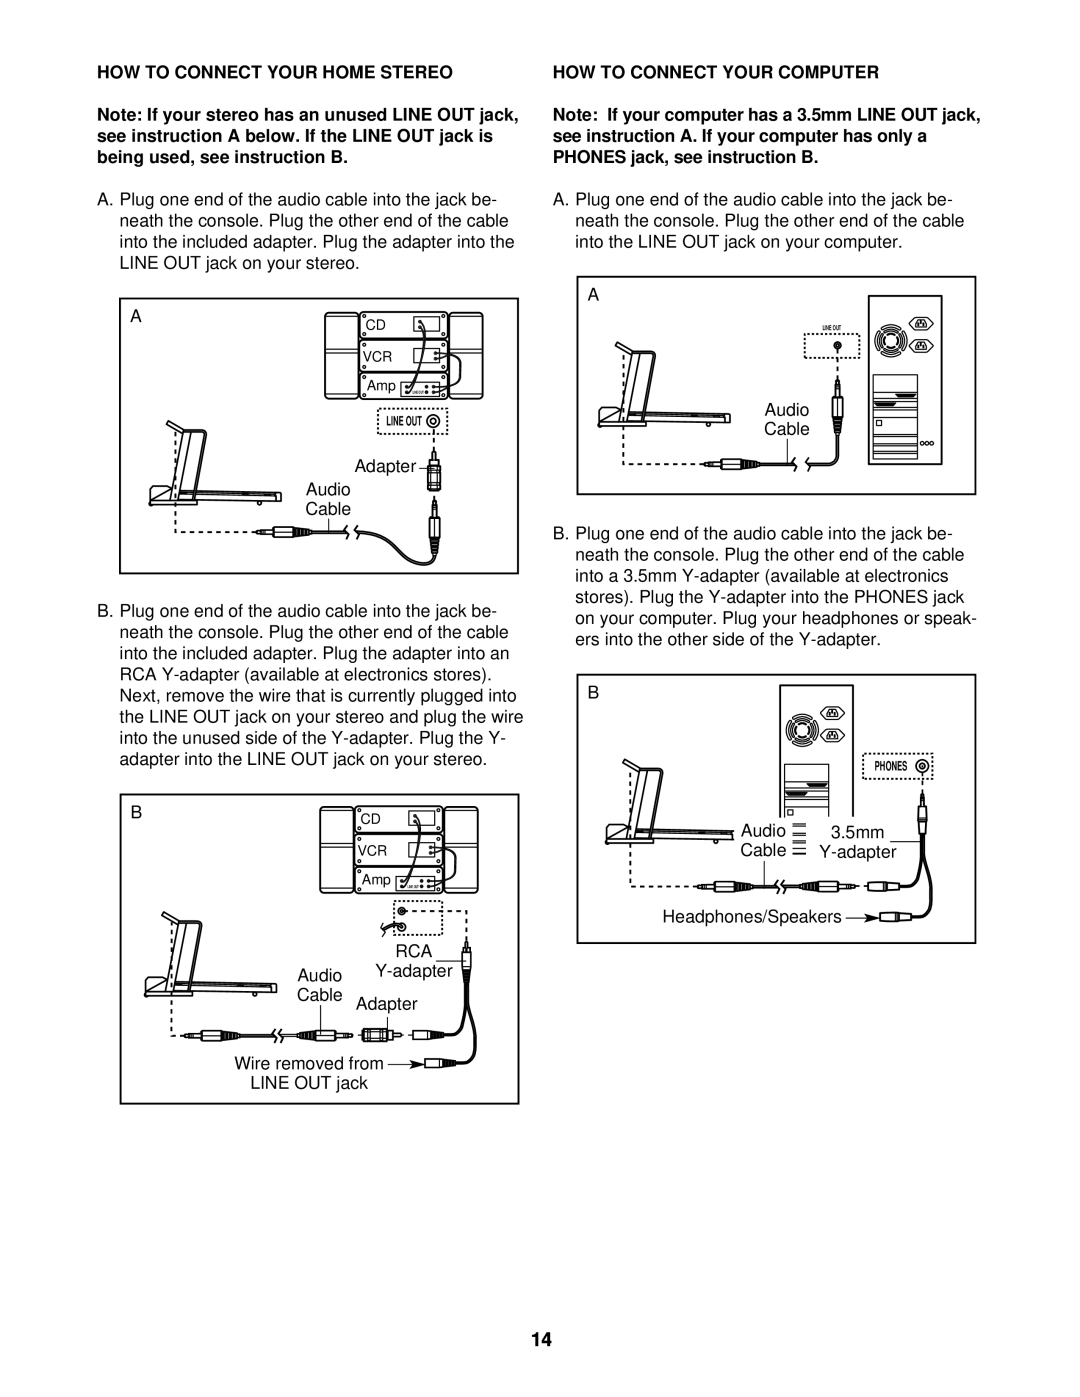 ProForm 831.293040 user manual How To Connect Your Home Stereo, How To Connect Your Computer 